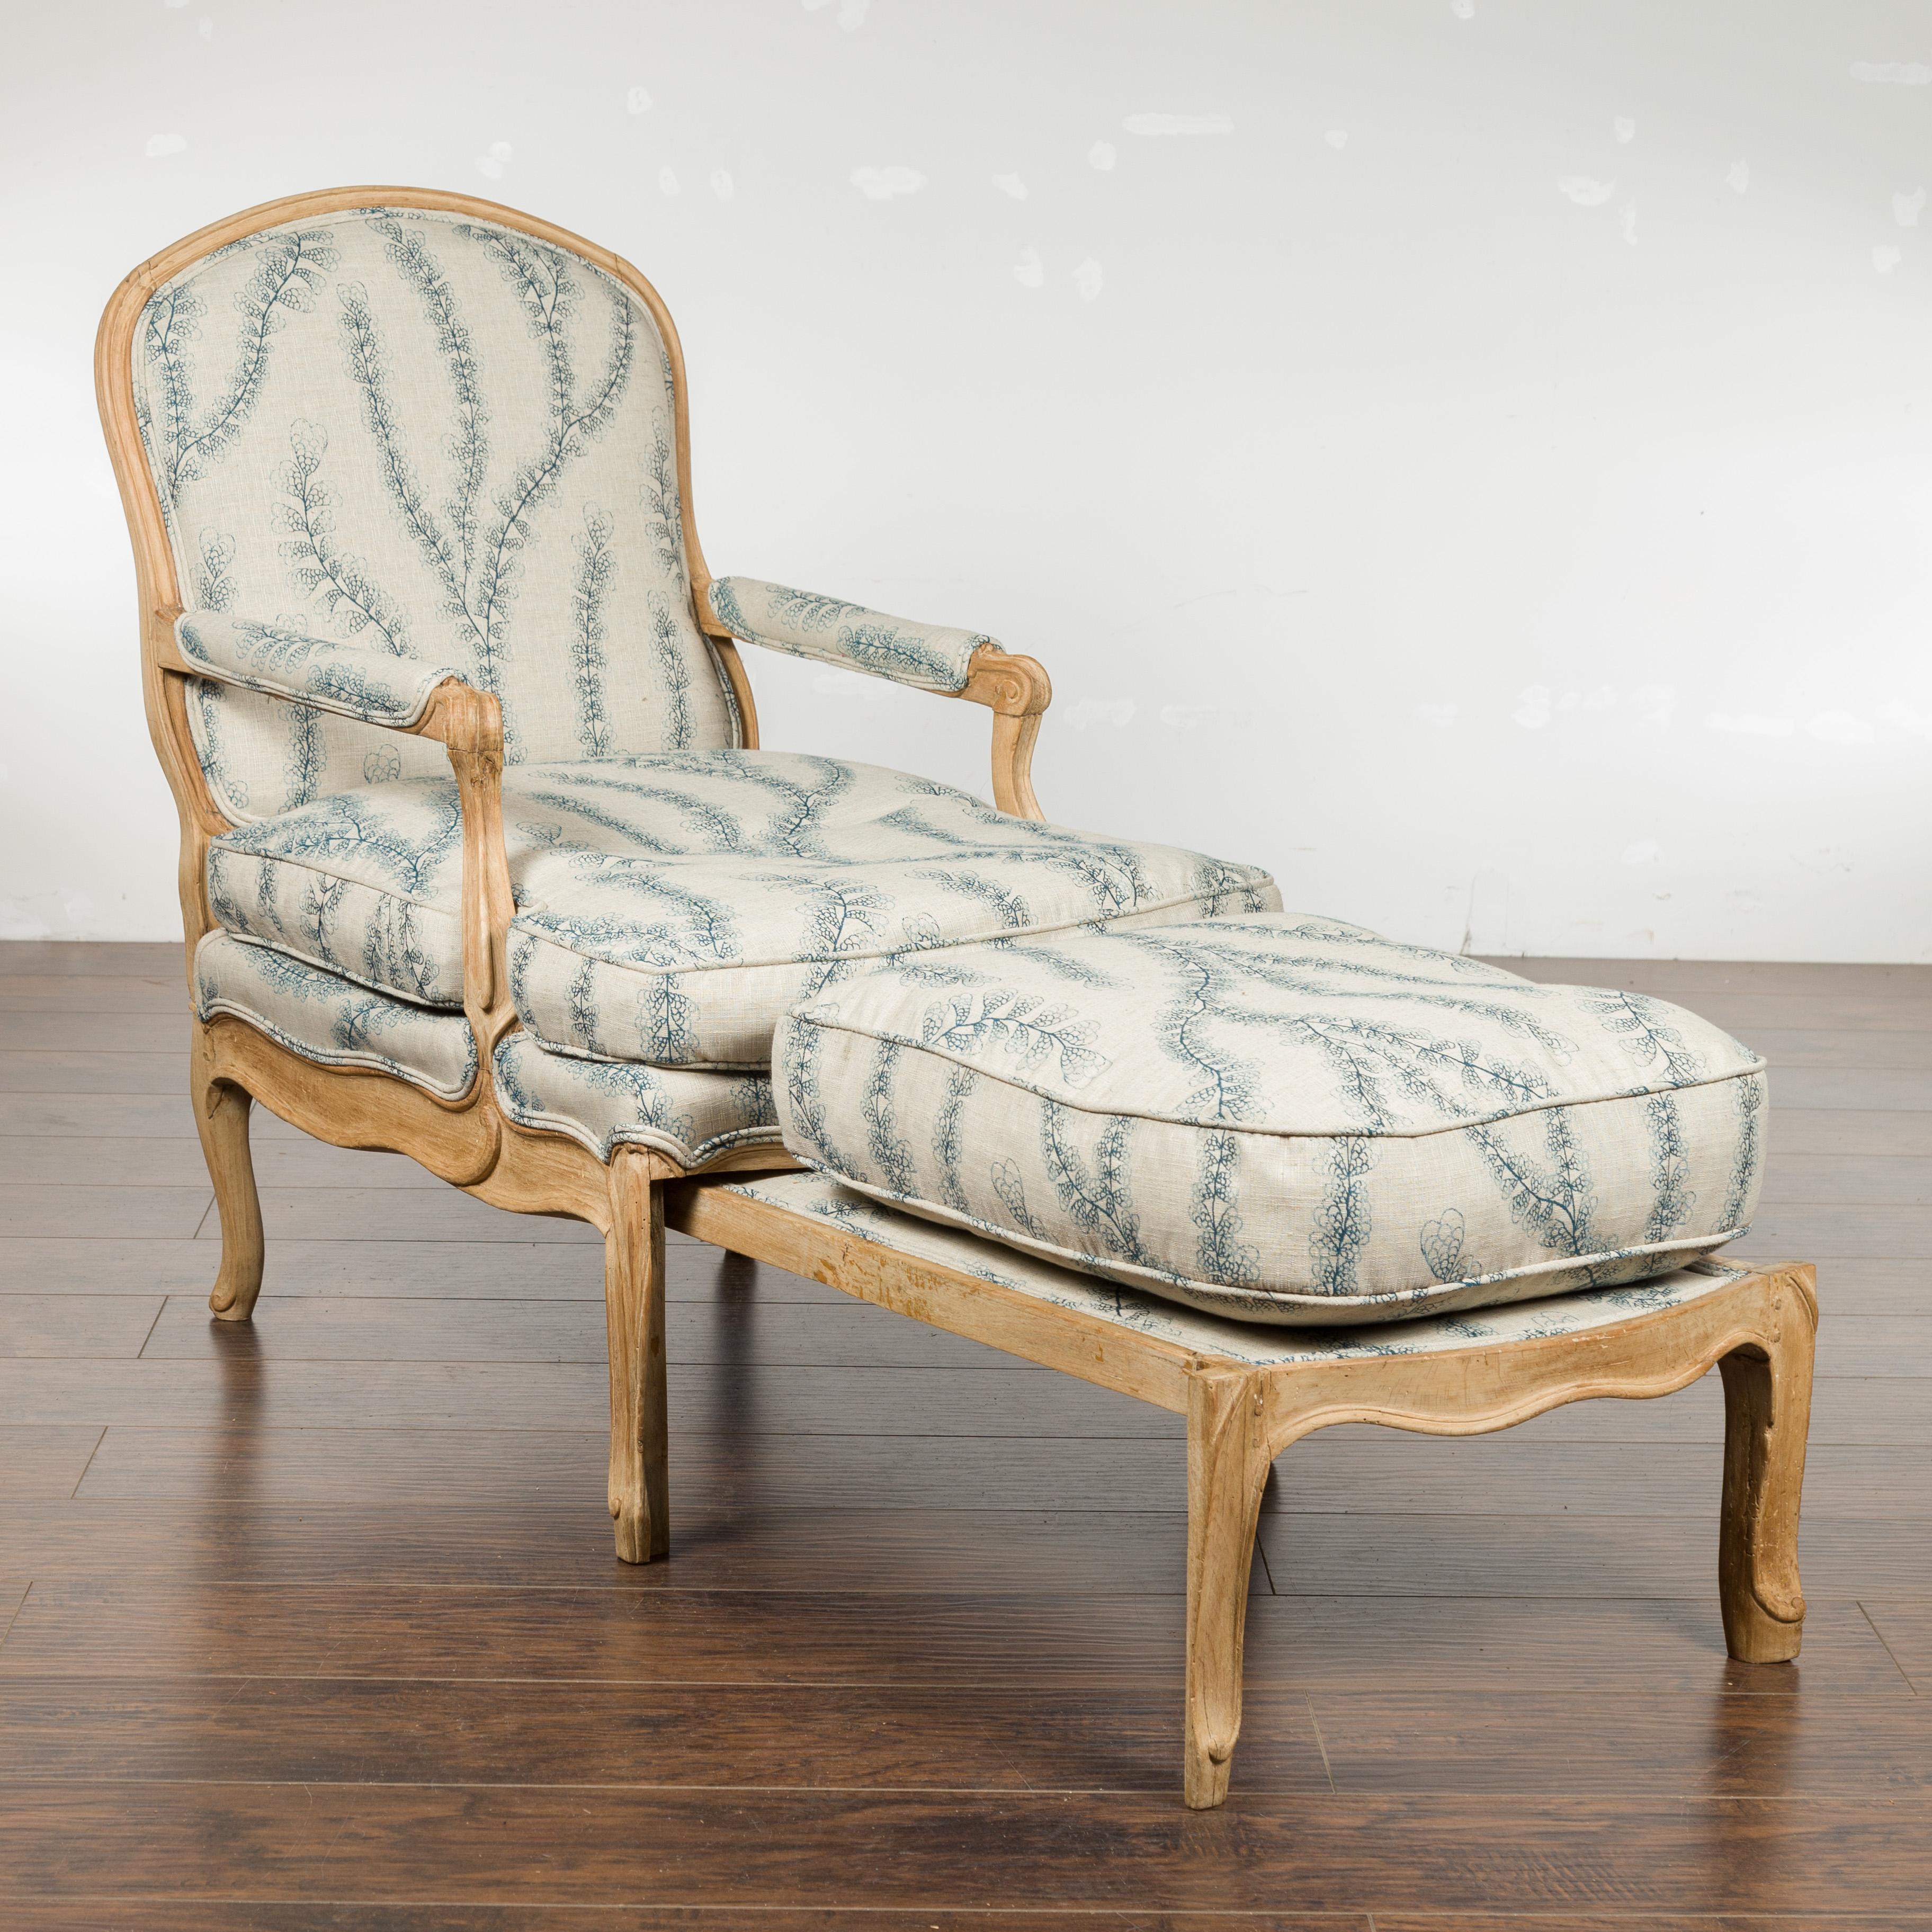 A French Louis XV style oak lounge chair from the early 19th century, with natural patina and foliage-adorned upholstery. Created in France during the early years of the 19th century, this oak fauteuil features a pull-out in the front transforming